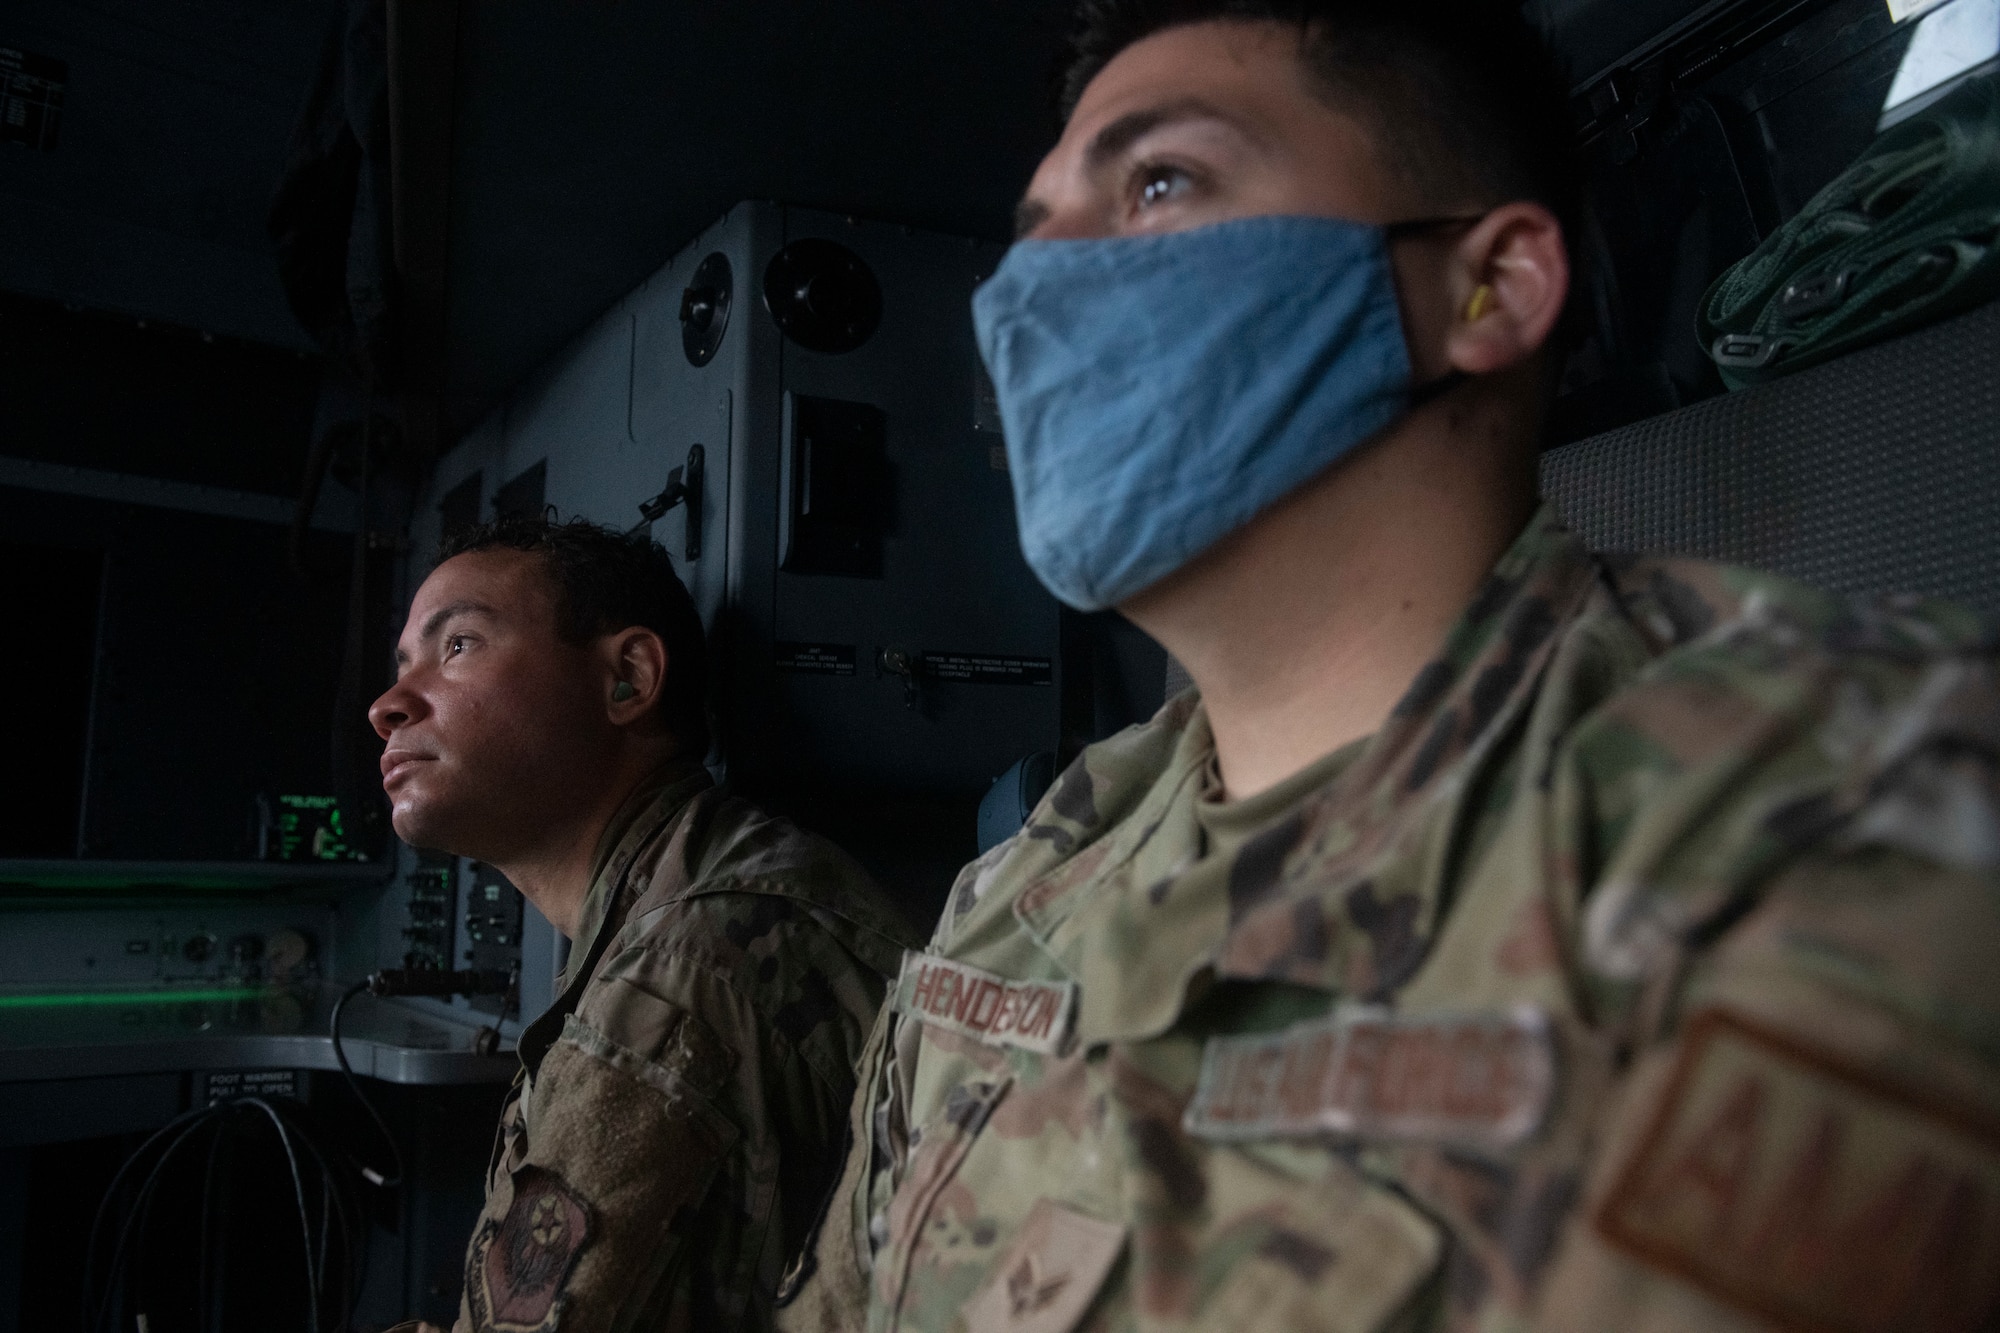 Staff Sgt. Kyle Glasford, 753rd Special Operations Aircraft Maintenance Squadron CV-22 Osprey avionics specialist, left, and Senior Airman Michael Henderson, 753rd SOAMXS munitions systems inspector, wait and watch prior to takeoff during an incentive flight on a C-130J Super Hercules at Yokota Air Base, Japan, Oct. 1, 2021. Glasford and Henderson work on CV-22s and the incentive flight gave them a chance to learn more about a different type of aircraft. (U.S. Air Force photo by Staff Sgt. Joshua Edwards)